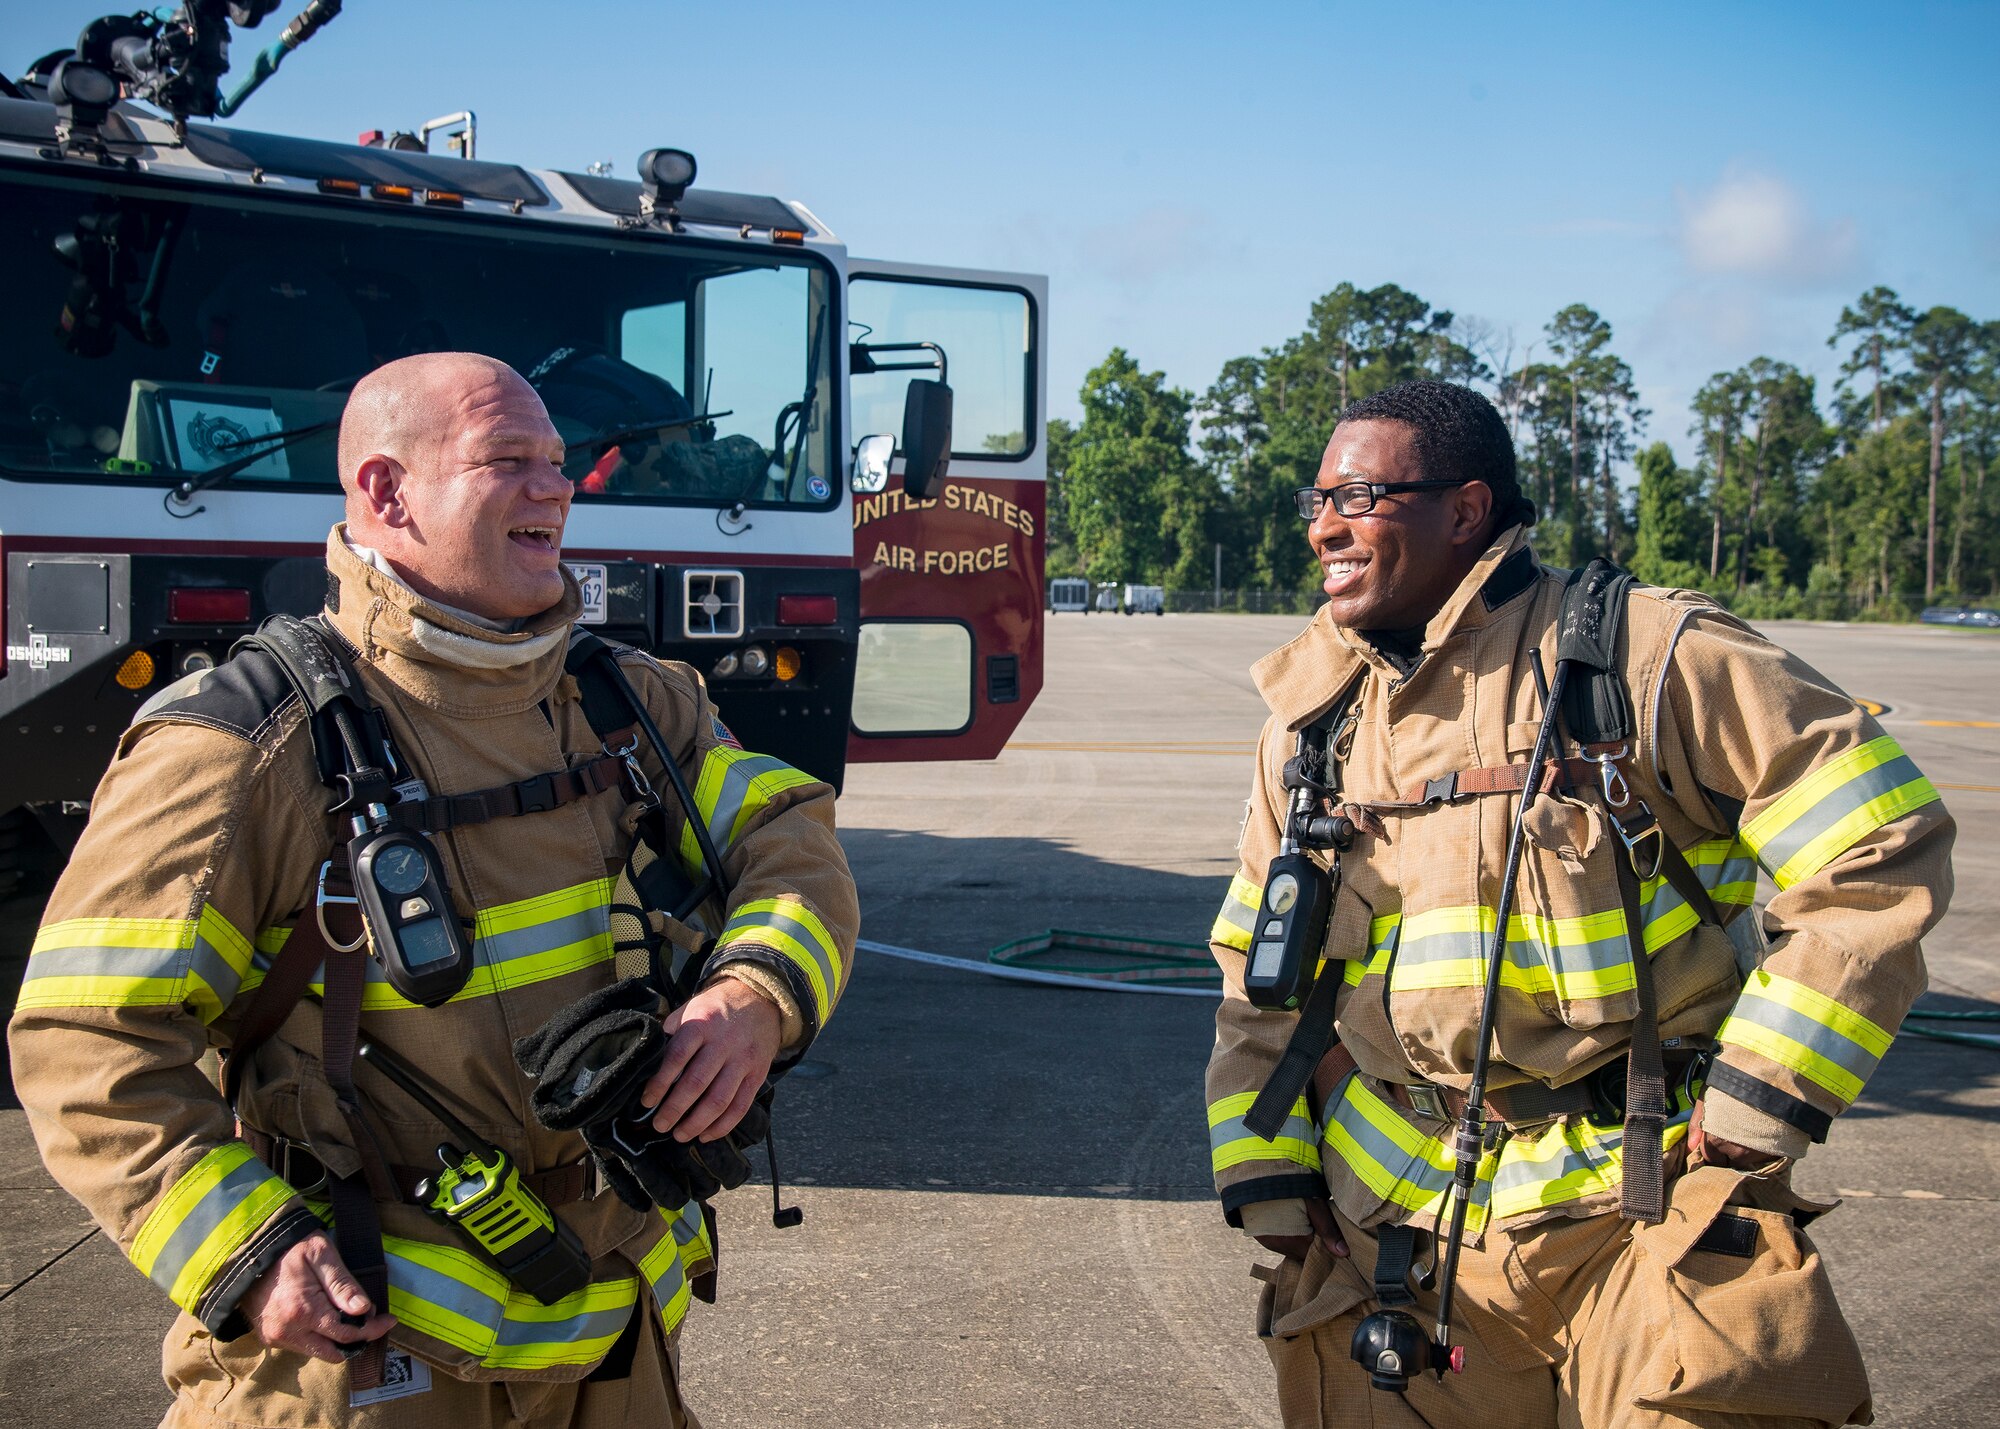 Tech Sgt Gary Schmidt, left, 23d Civil Engineer Squadron (CES) firefighter station chief and Staff Sgt. Tyler McFarland, 23d CES firefighter crew chief, share a laugh following HC-130J Combat King II egress training, July 11, 2019, at Moody Air Force Base, Ga Firefighters conducted the training to evaluate their overall knowledge and proficiency of how to properly shut down and rescue personnel from a C-130 during an emergency situation. The training required the firefighters to properly enter and ventilate the aircraft while conducting swift rescue techniques to safely locate and remove passengers from the aircraft. (U.S. Air Force photo by Airman 1st Class Eugene Oliver)